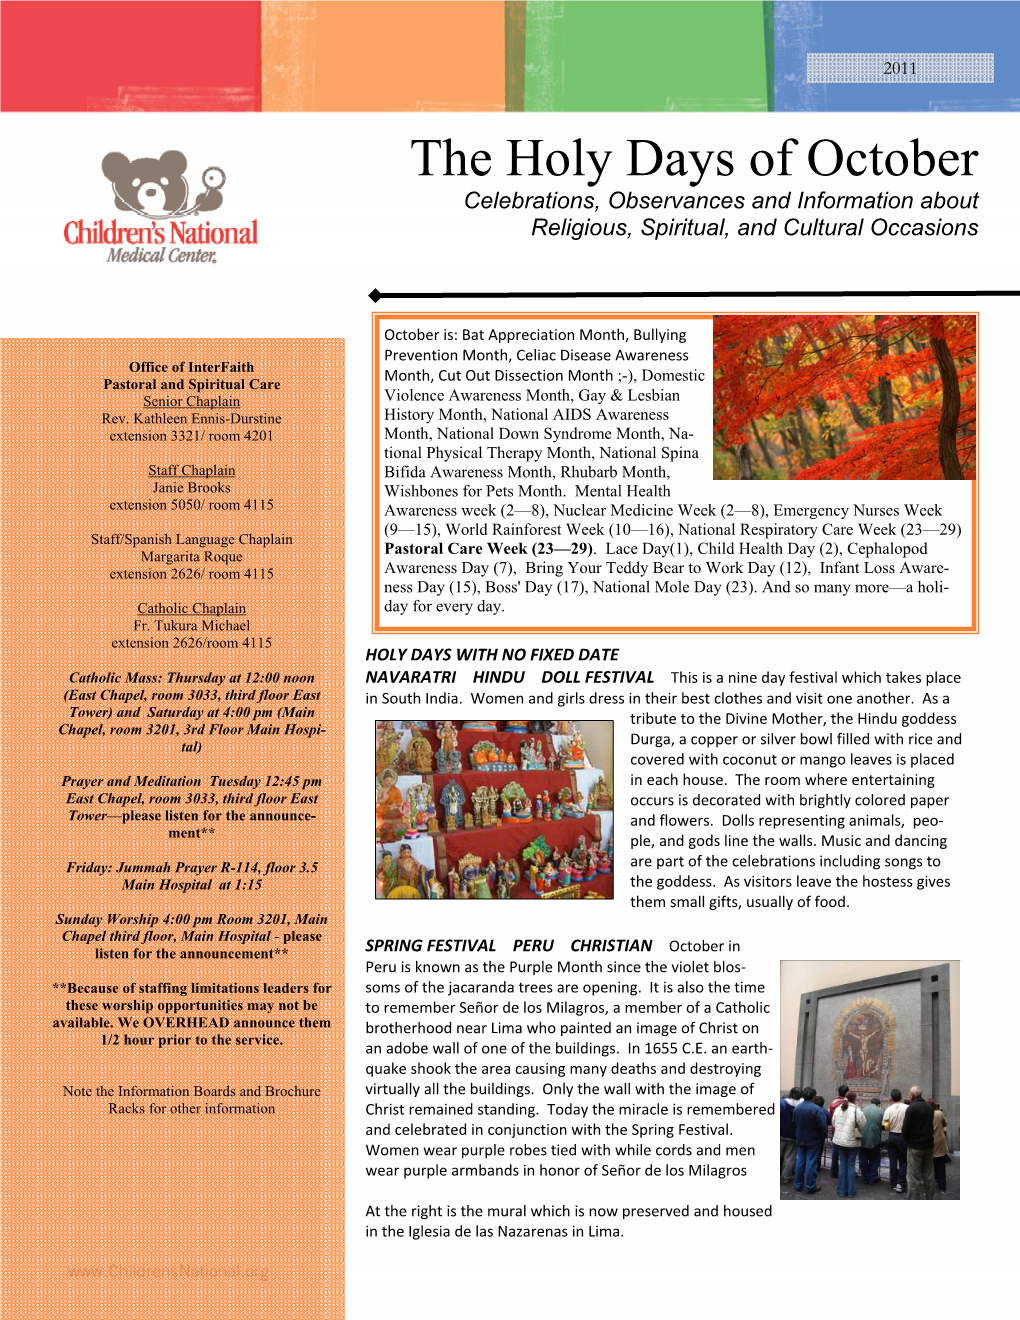 October Holy Days, Observances, and Celebrations.Pub